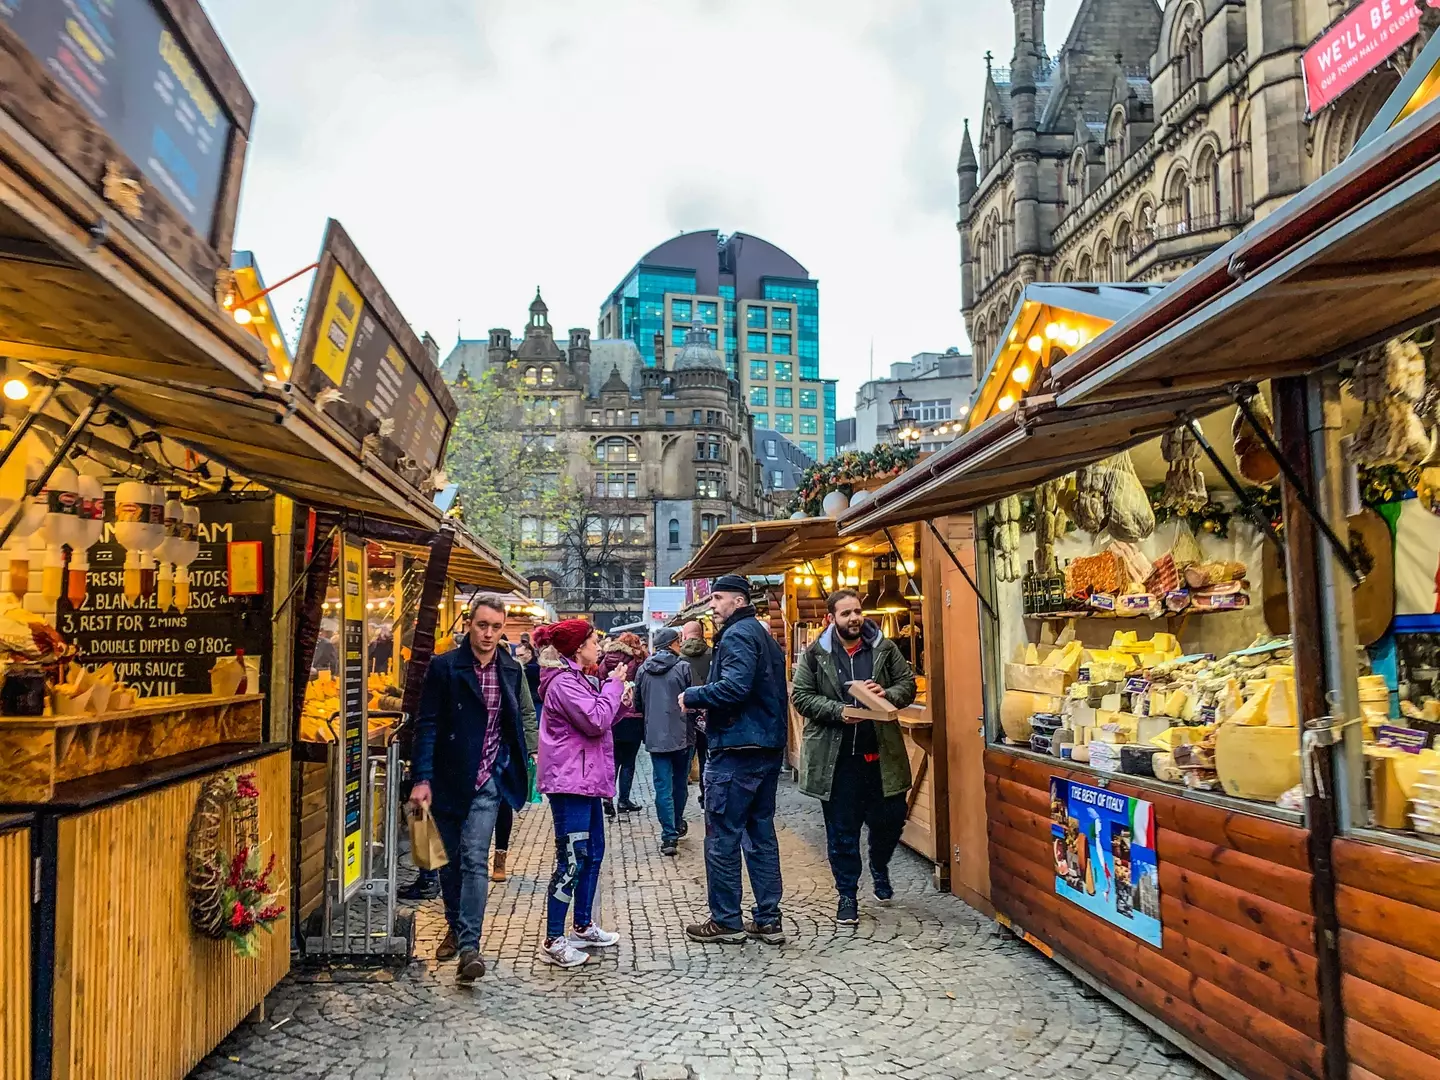 Manchester Christmas markets are amongst the biggest in Europe.